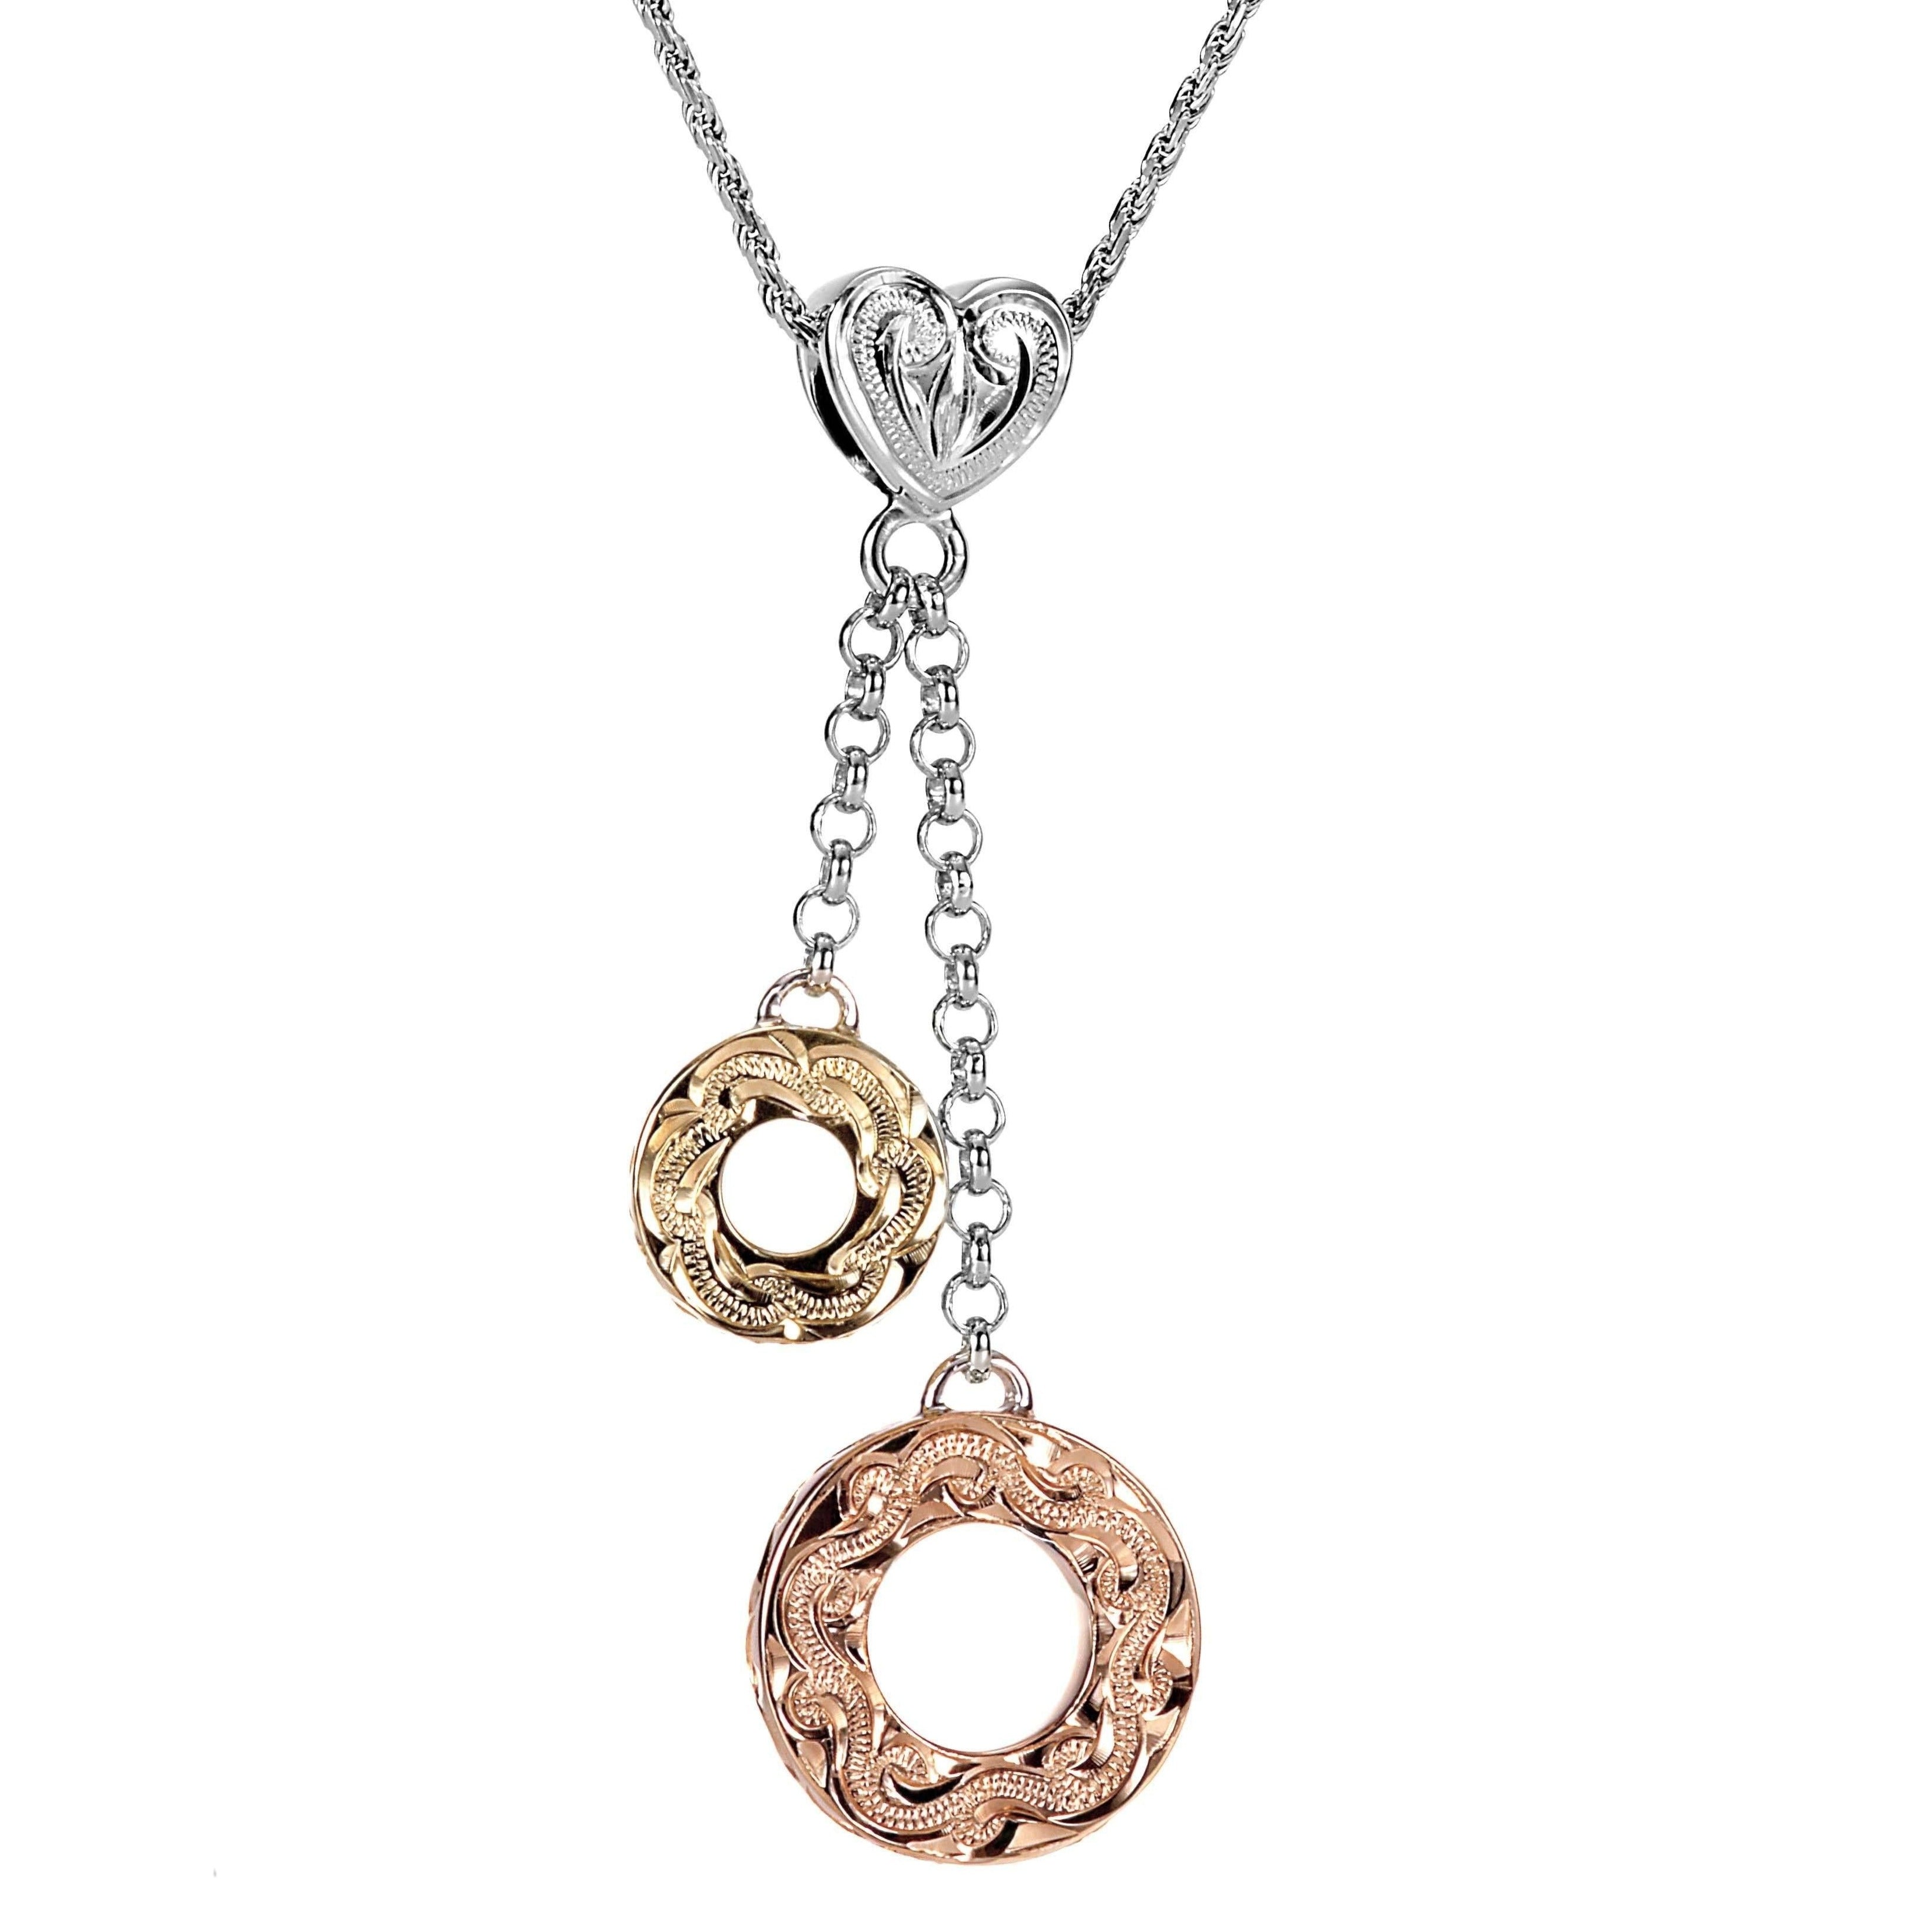 The picture shows a 14K rose and yellow gold two circles and one heart charm pendant with hand engravings.